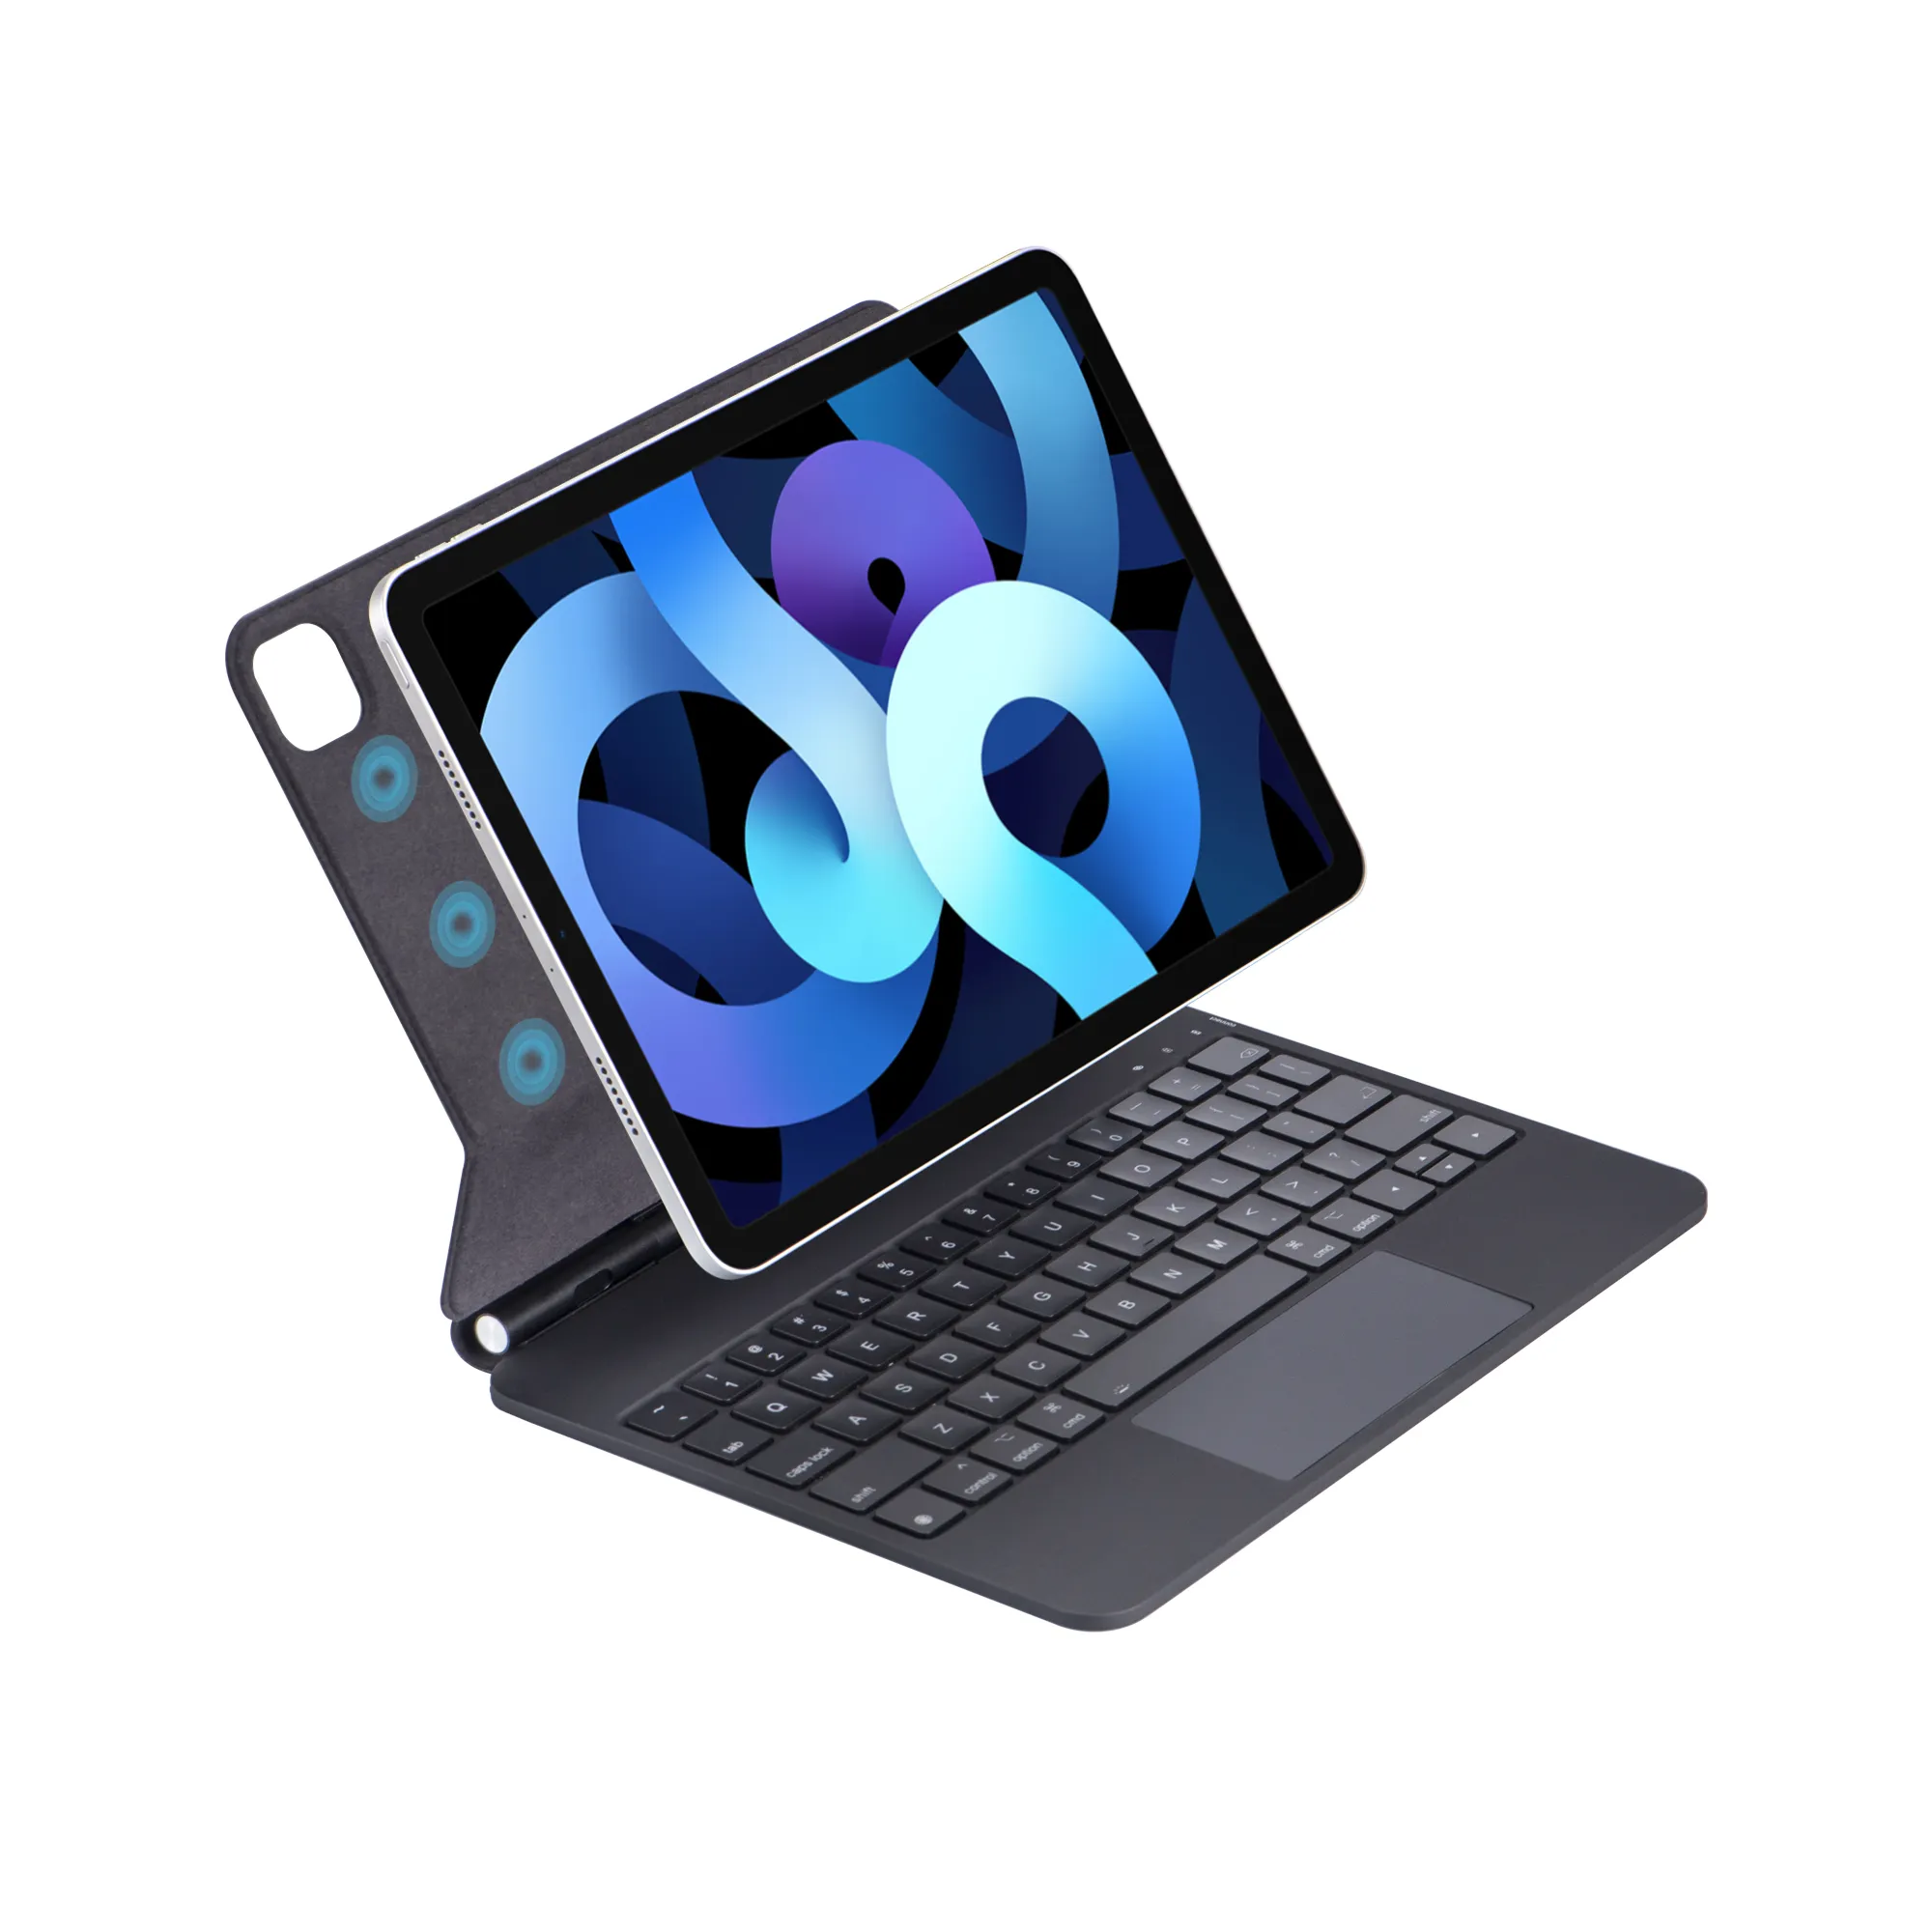 Foldable Magnetic Keyboard Folio Case With Touchpad For IPad Pro 11, Air 4,  And Air 5 Magic Protective Cover From Fcover, $64.68